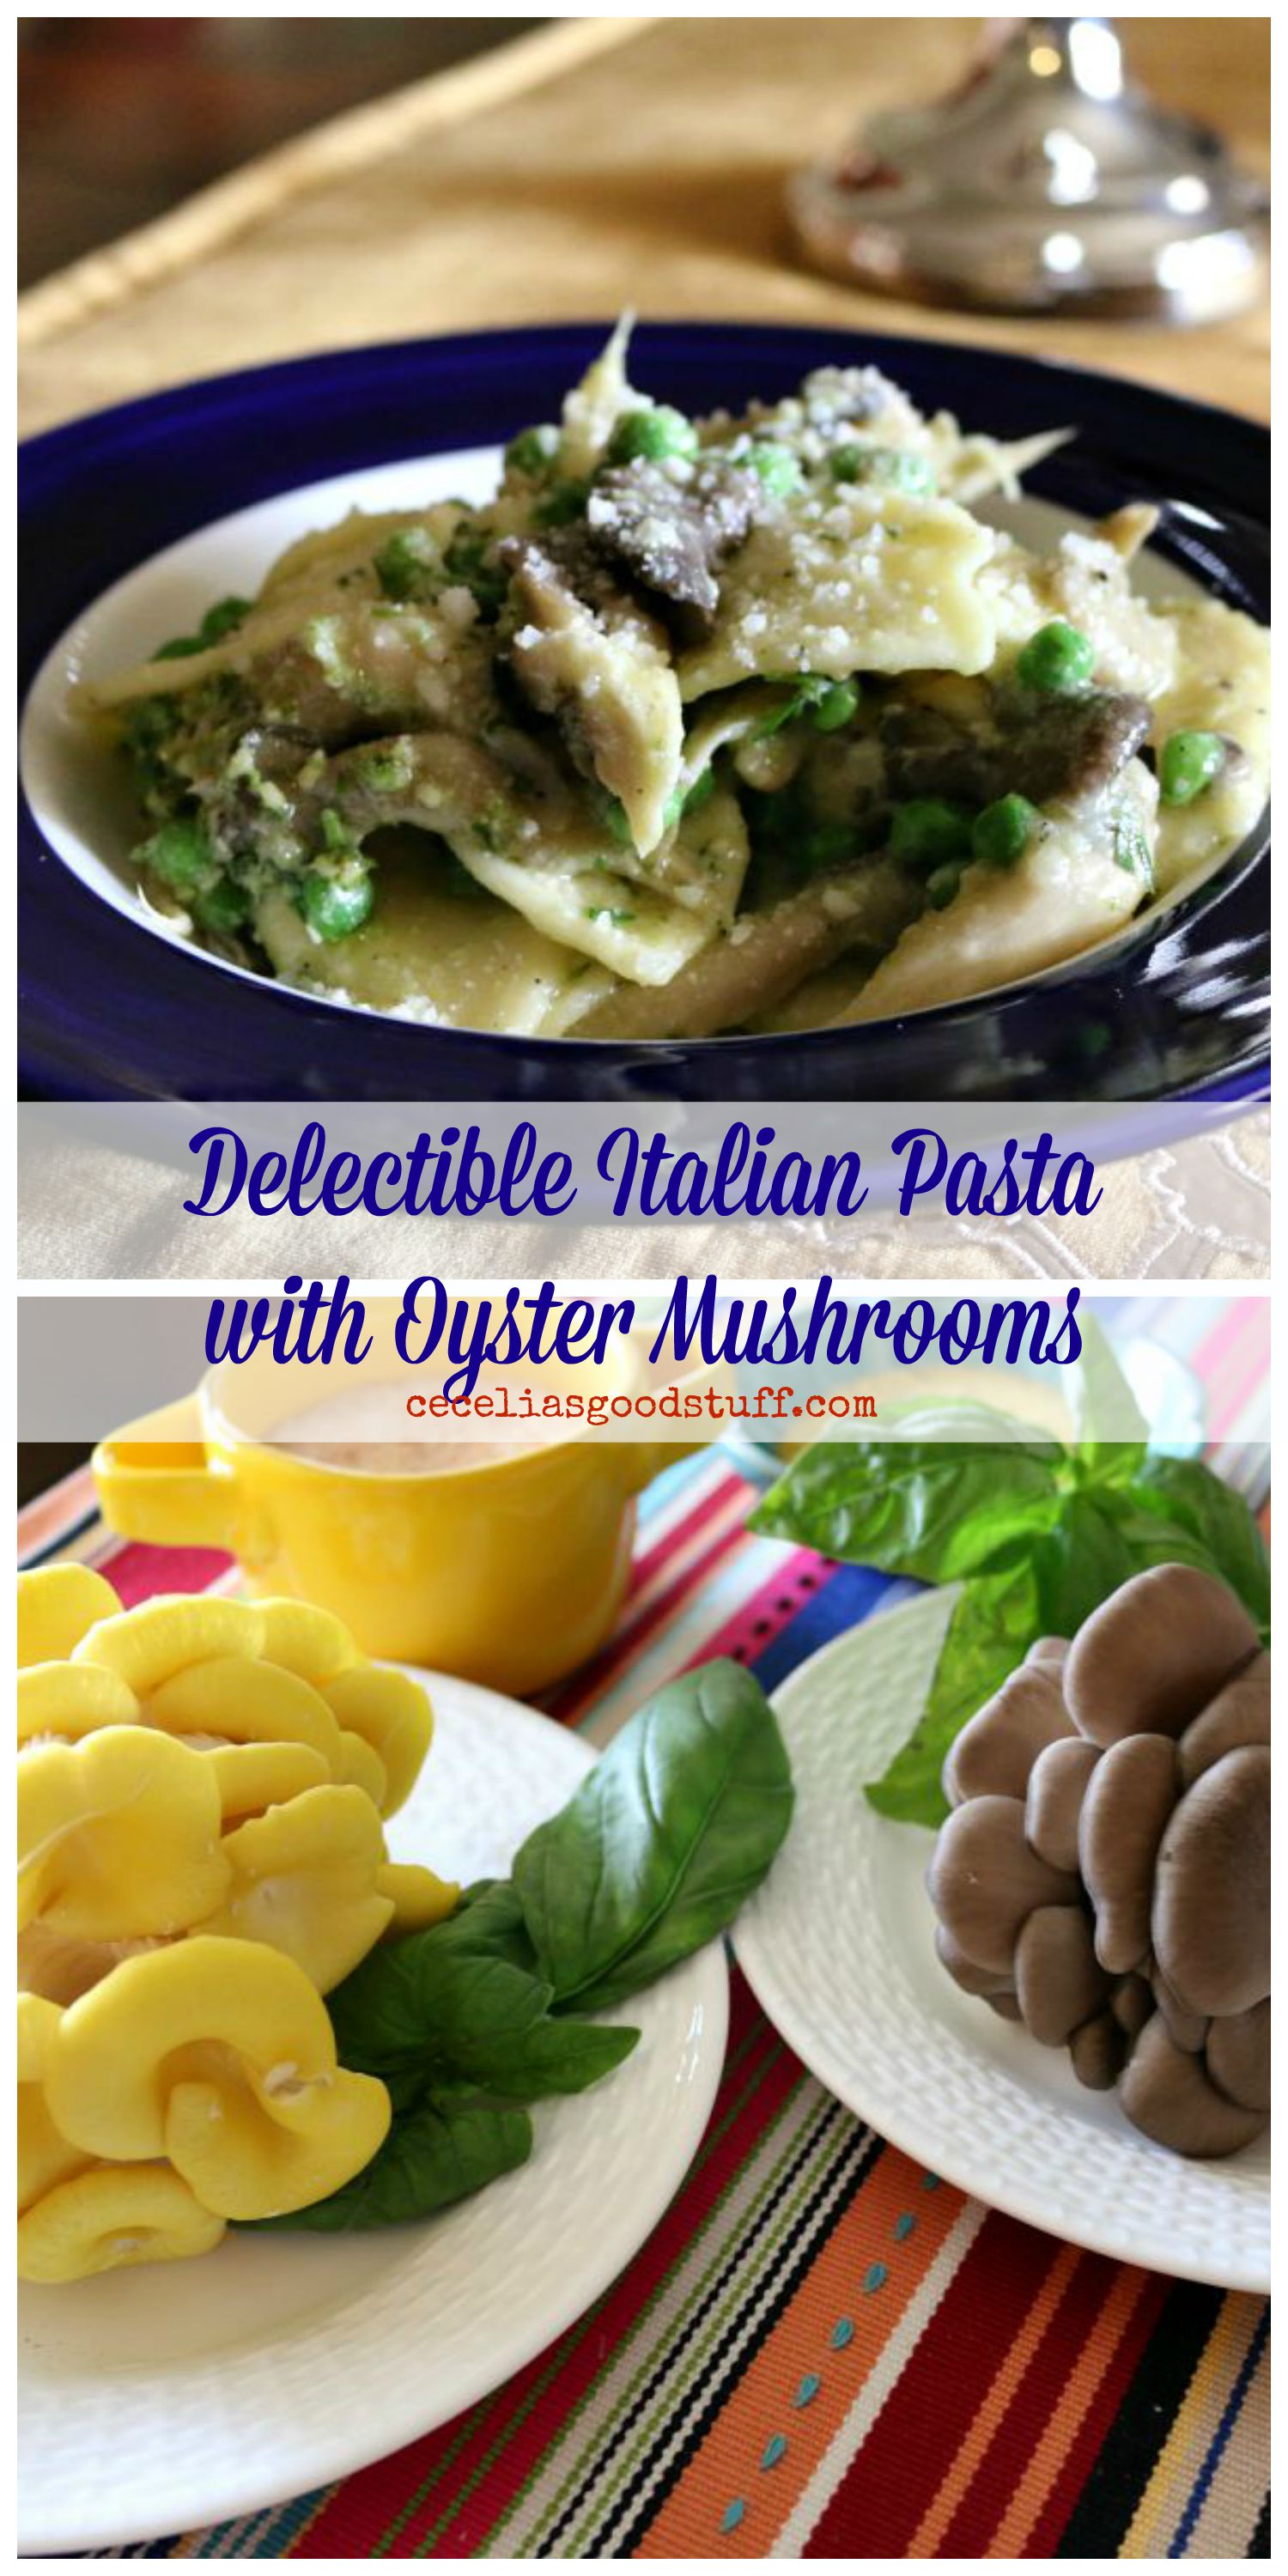 Imported Italian Pasta with fresh oyster mushrooms - Simple and Delicious! 